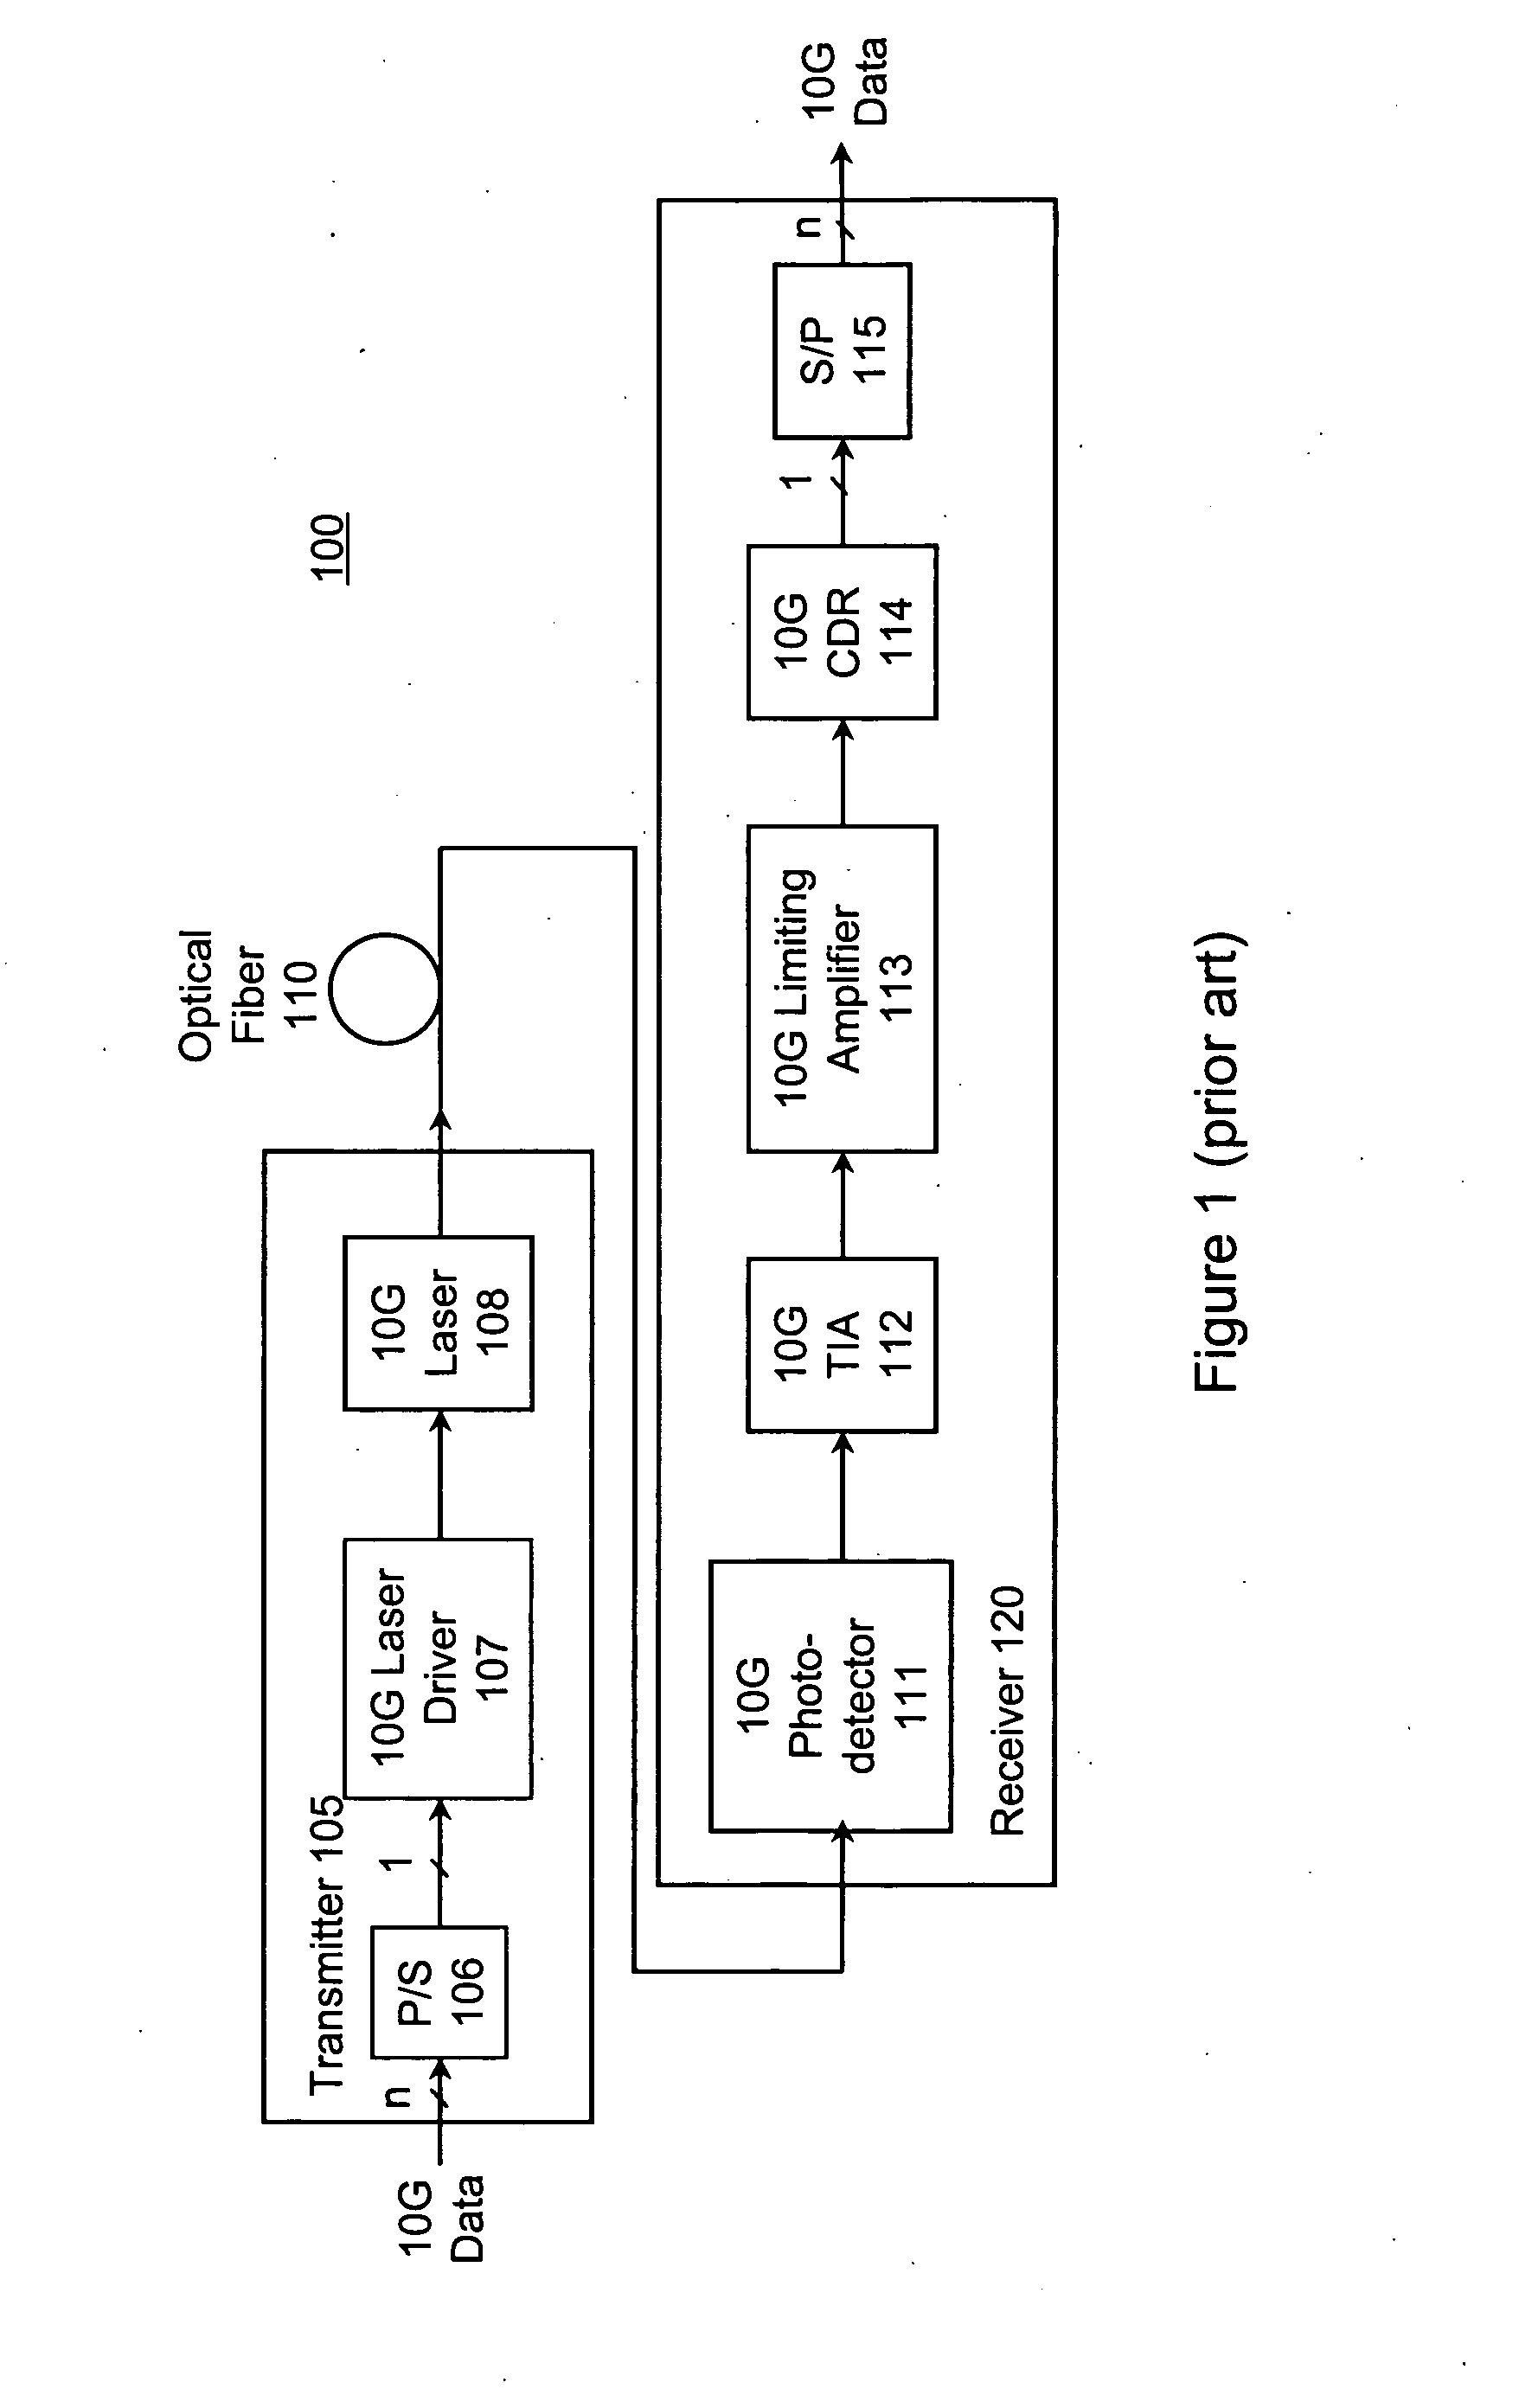 Testing of transmitters for communication links by software simulation of reference channel and/or reference receiver